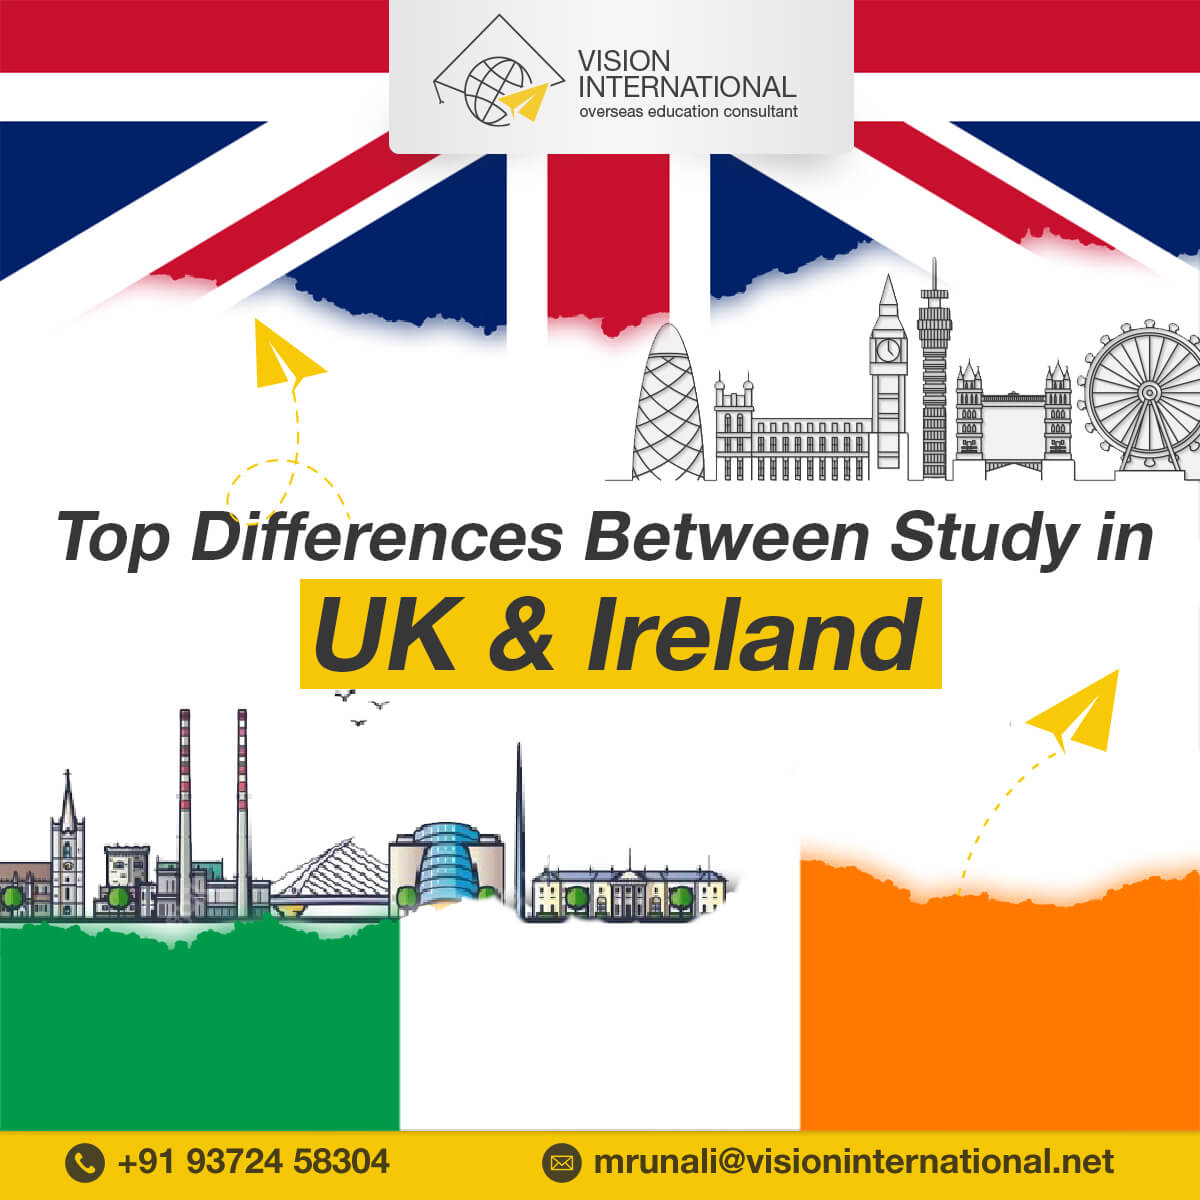 Top differences in between Study in UK and Study in Ireland